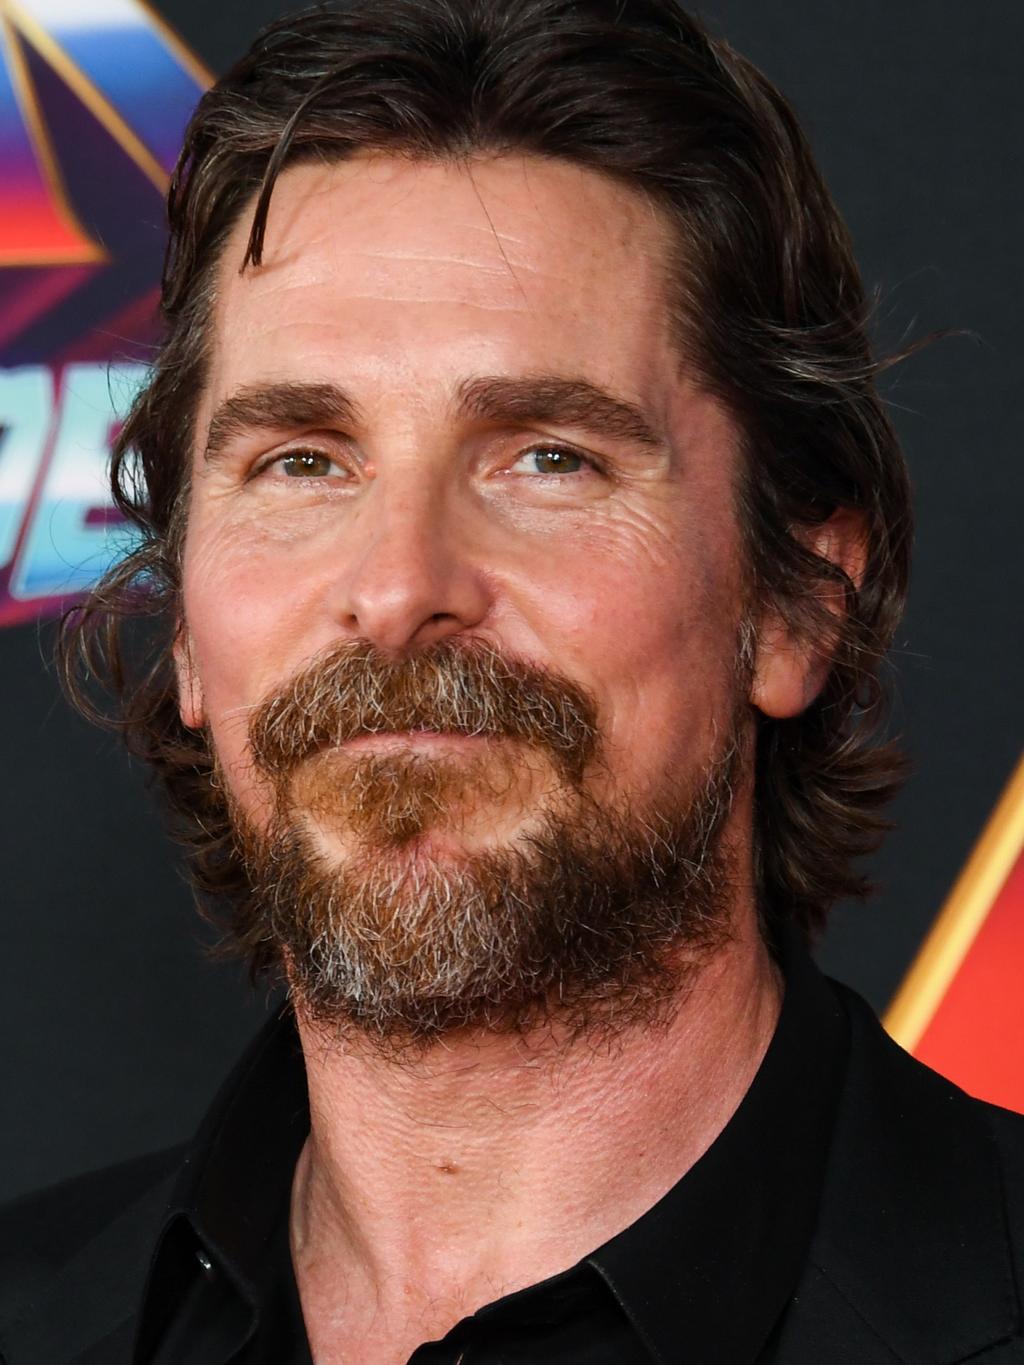 Christian Bale appeared in Eilish’s dream, and prompted her to dump an ex. Picture: Jon Kopaloff/Getty Images